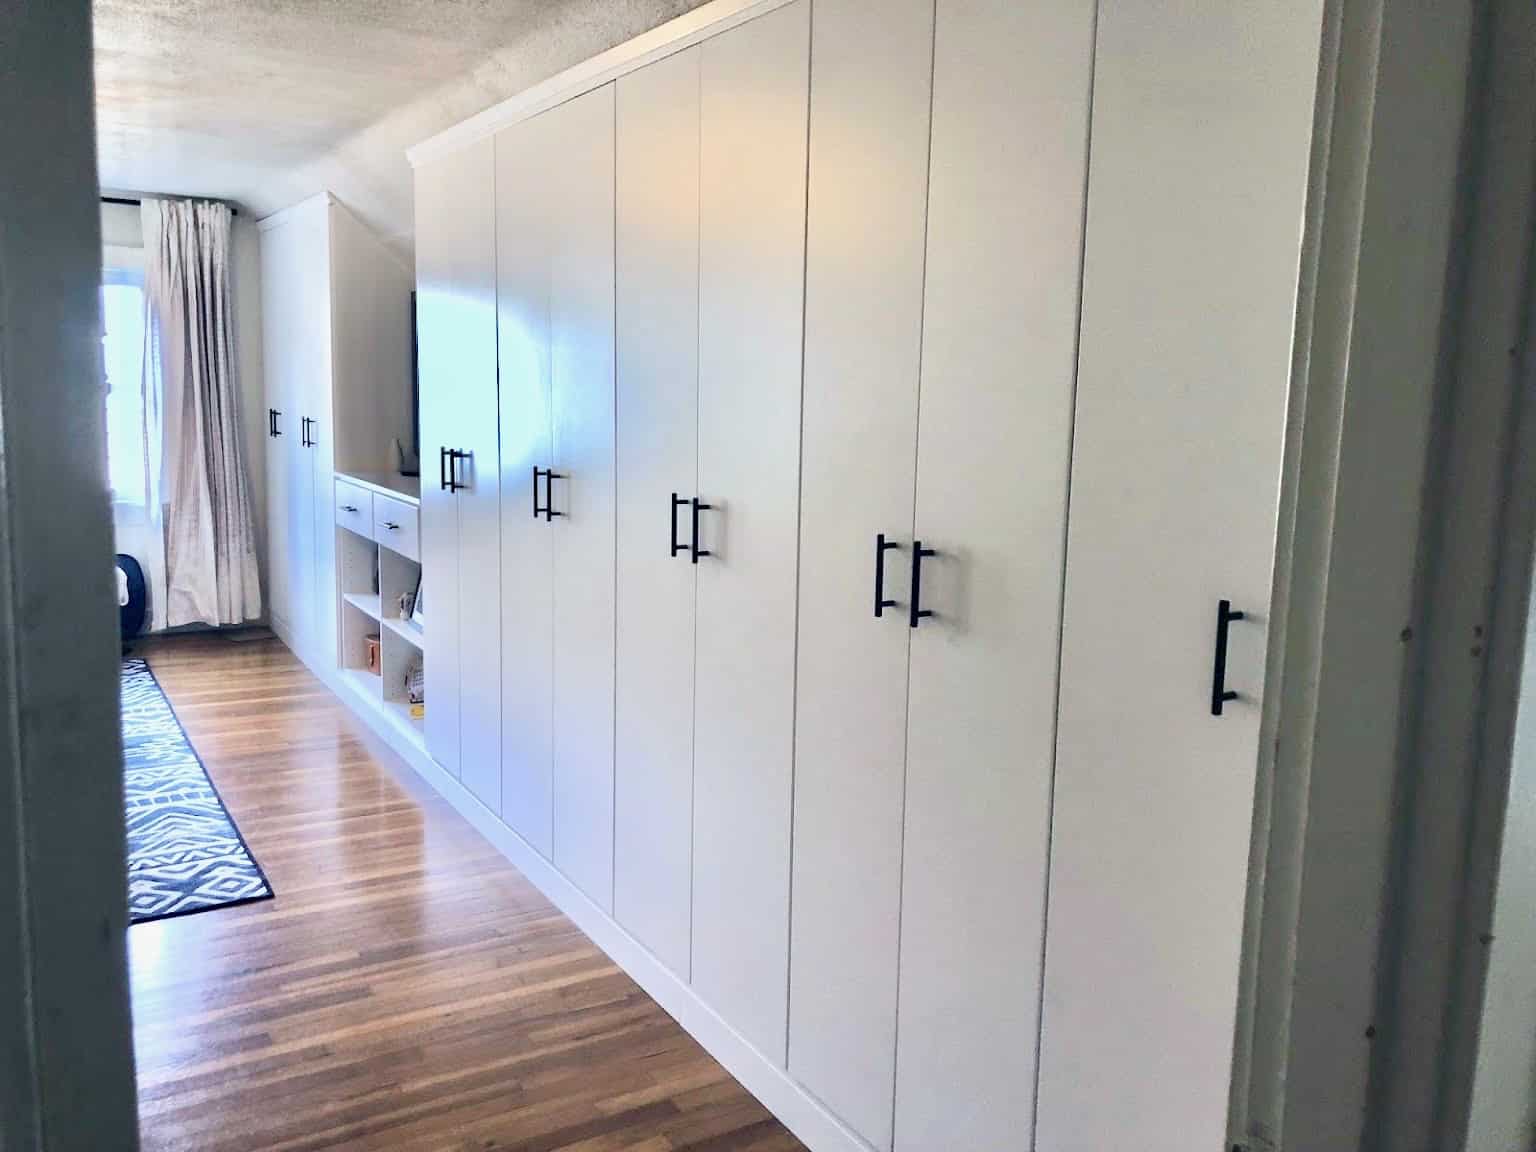 A custom built-in closet wardrobe otherwise known as an external closet or closet built-in. It includes a drawer bank, pull out trays, double hanging, roll out shelves, and upper storage.